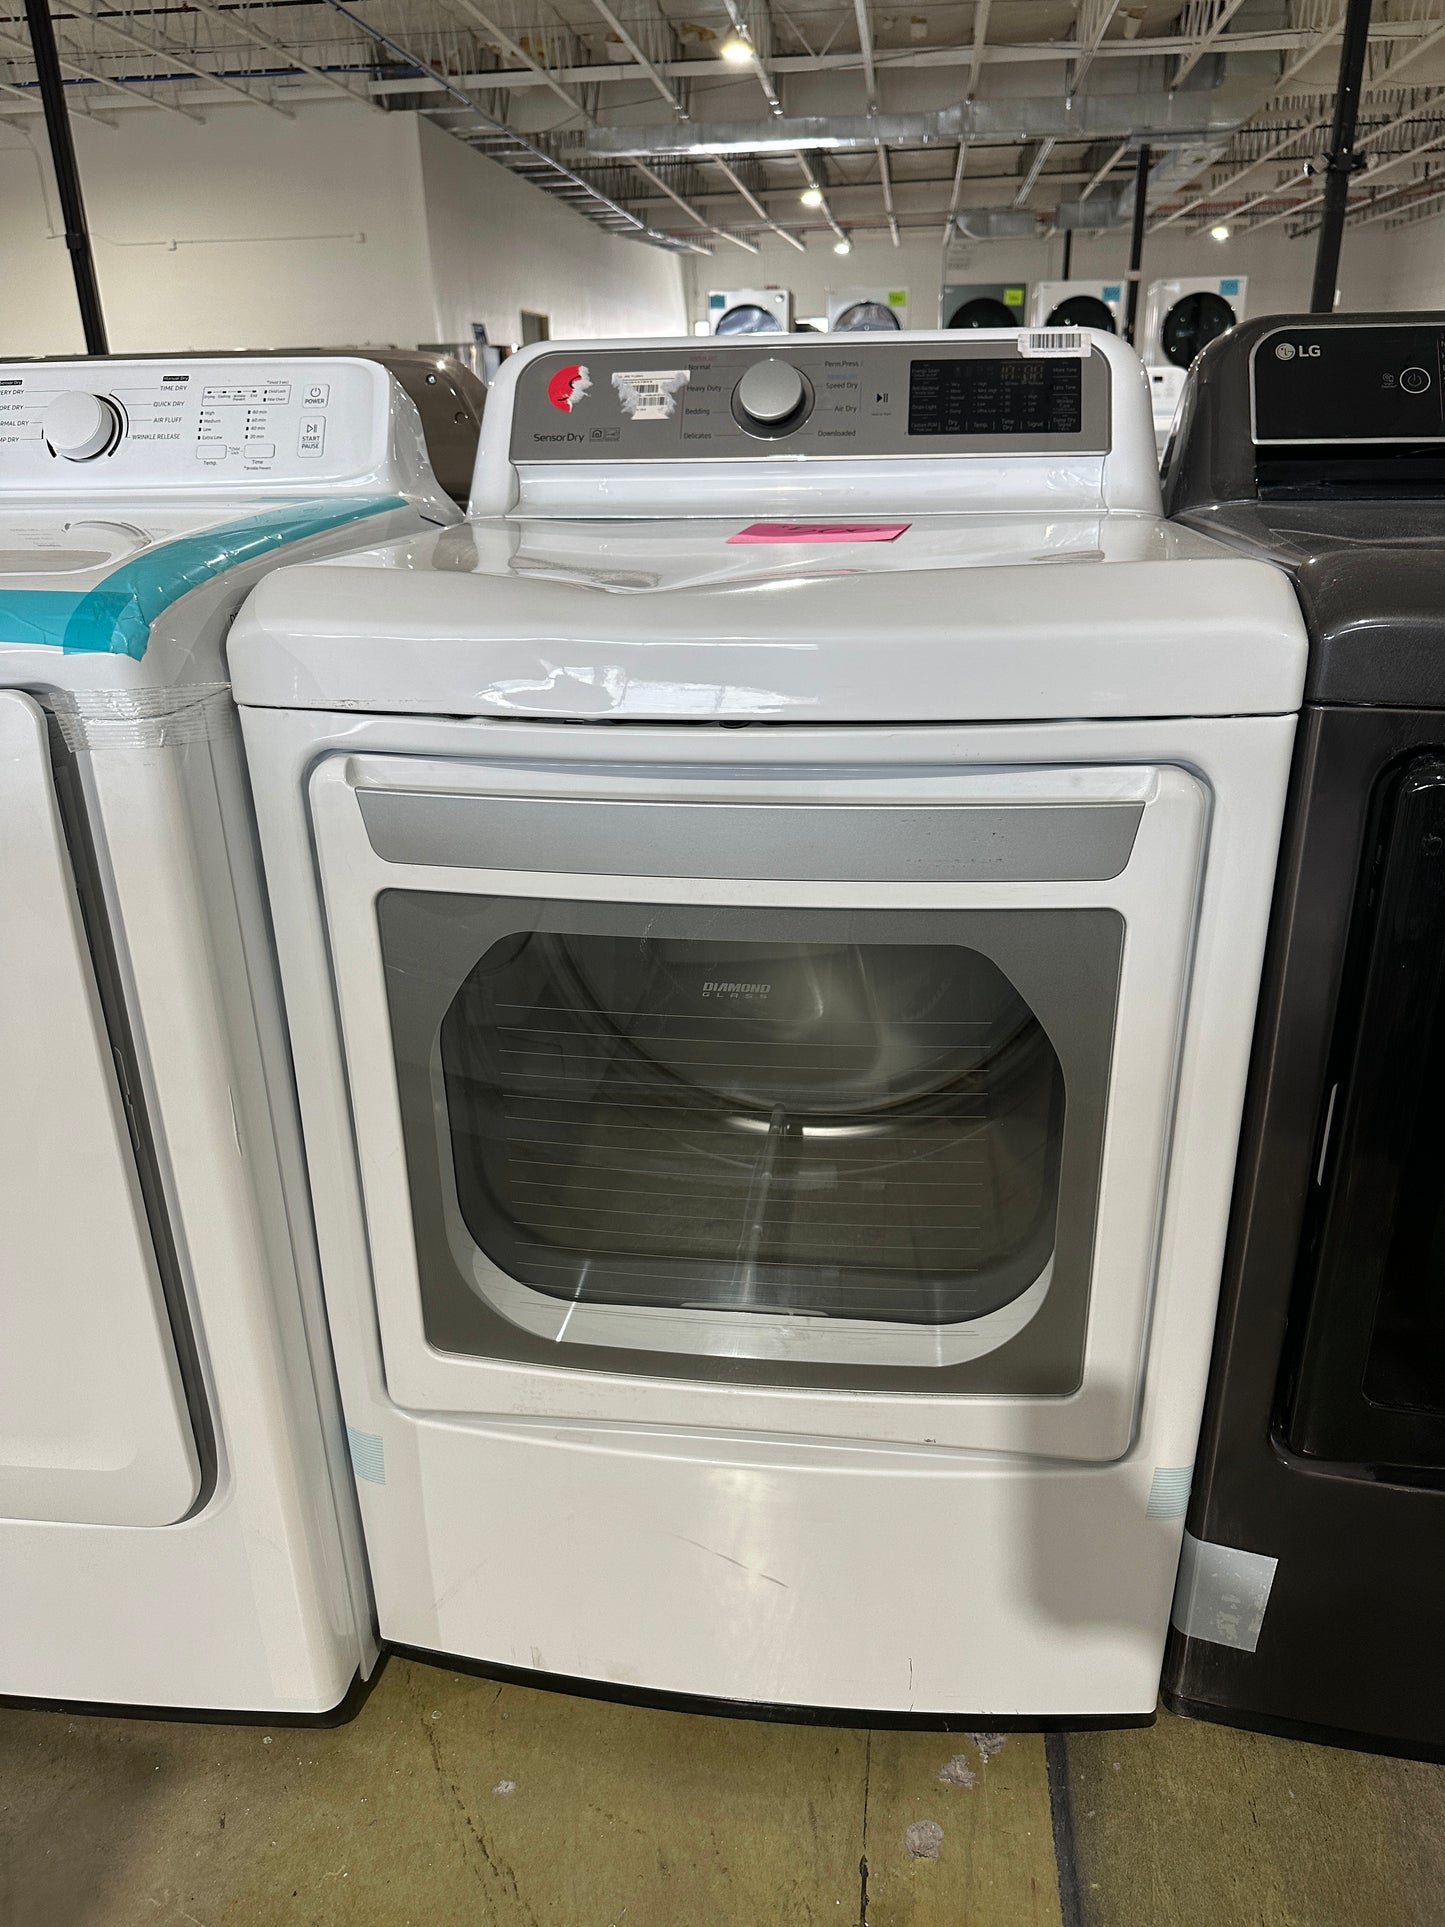 Model:DLE7300WE SMART ELECTRIC DRYER - DRY11575S